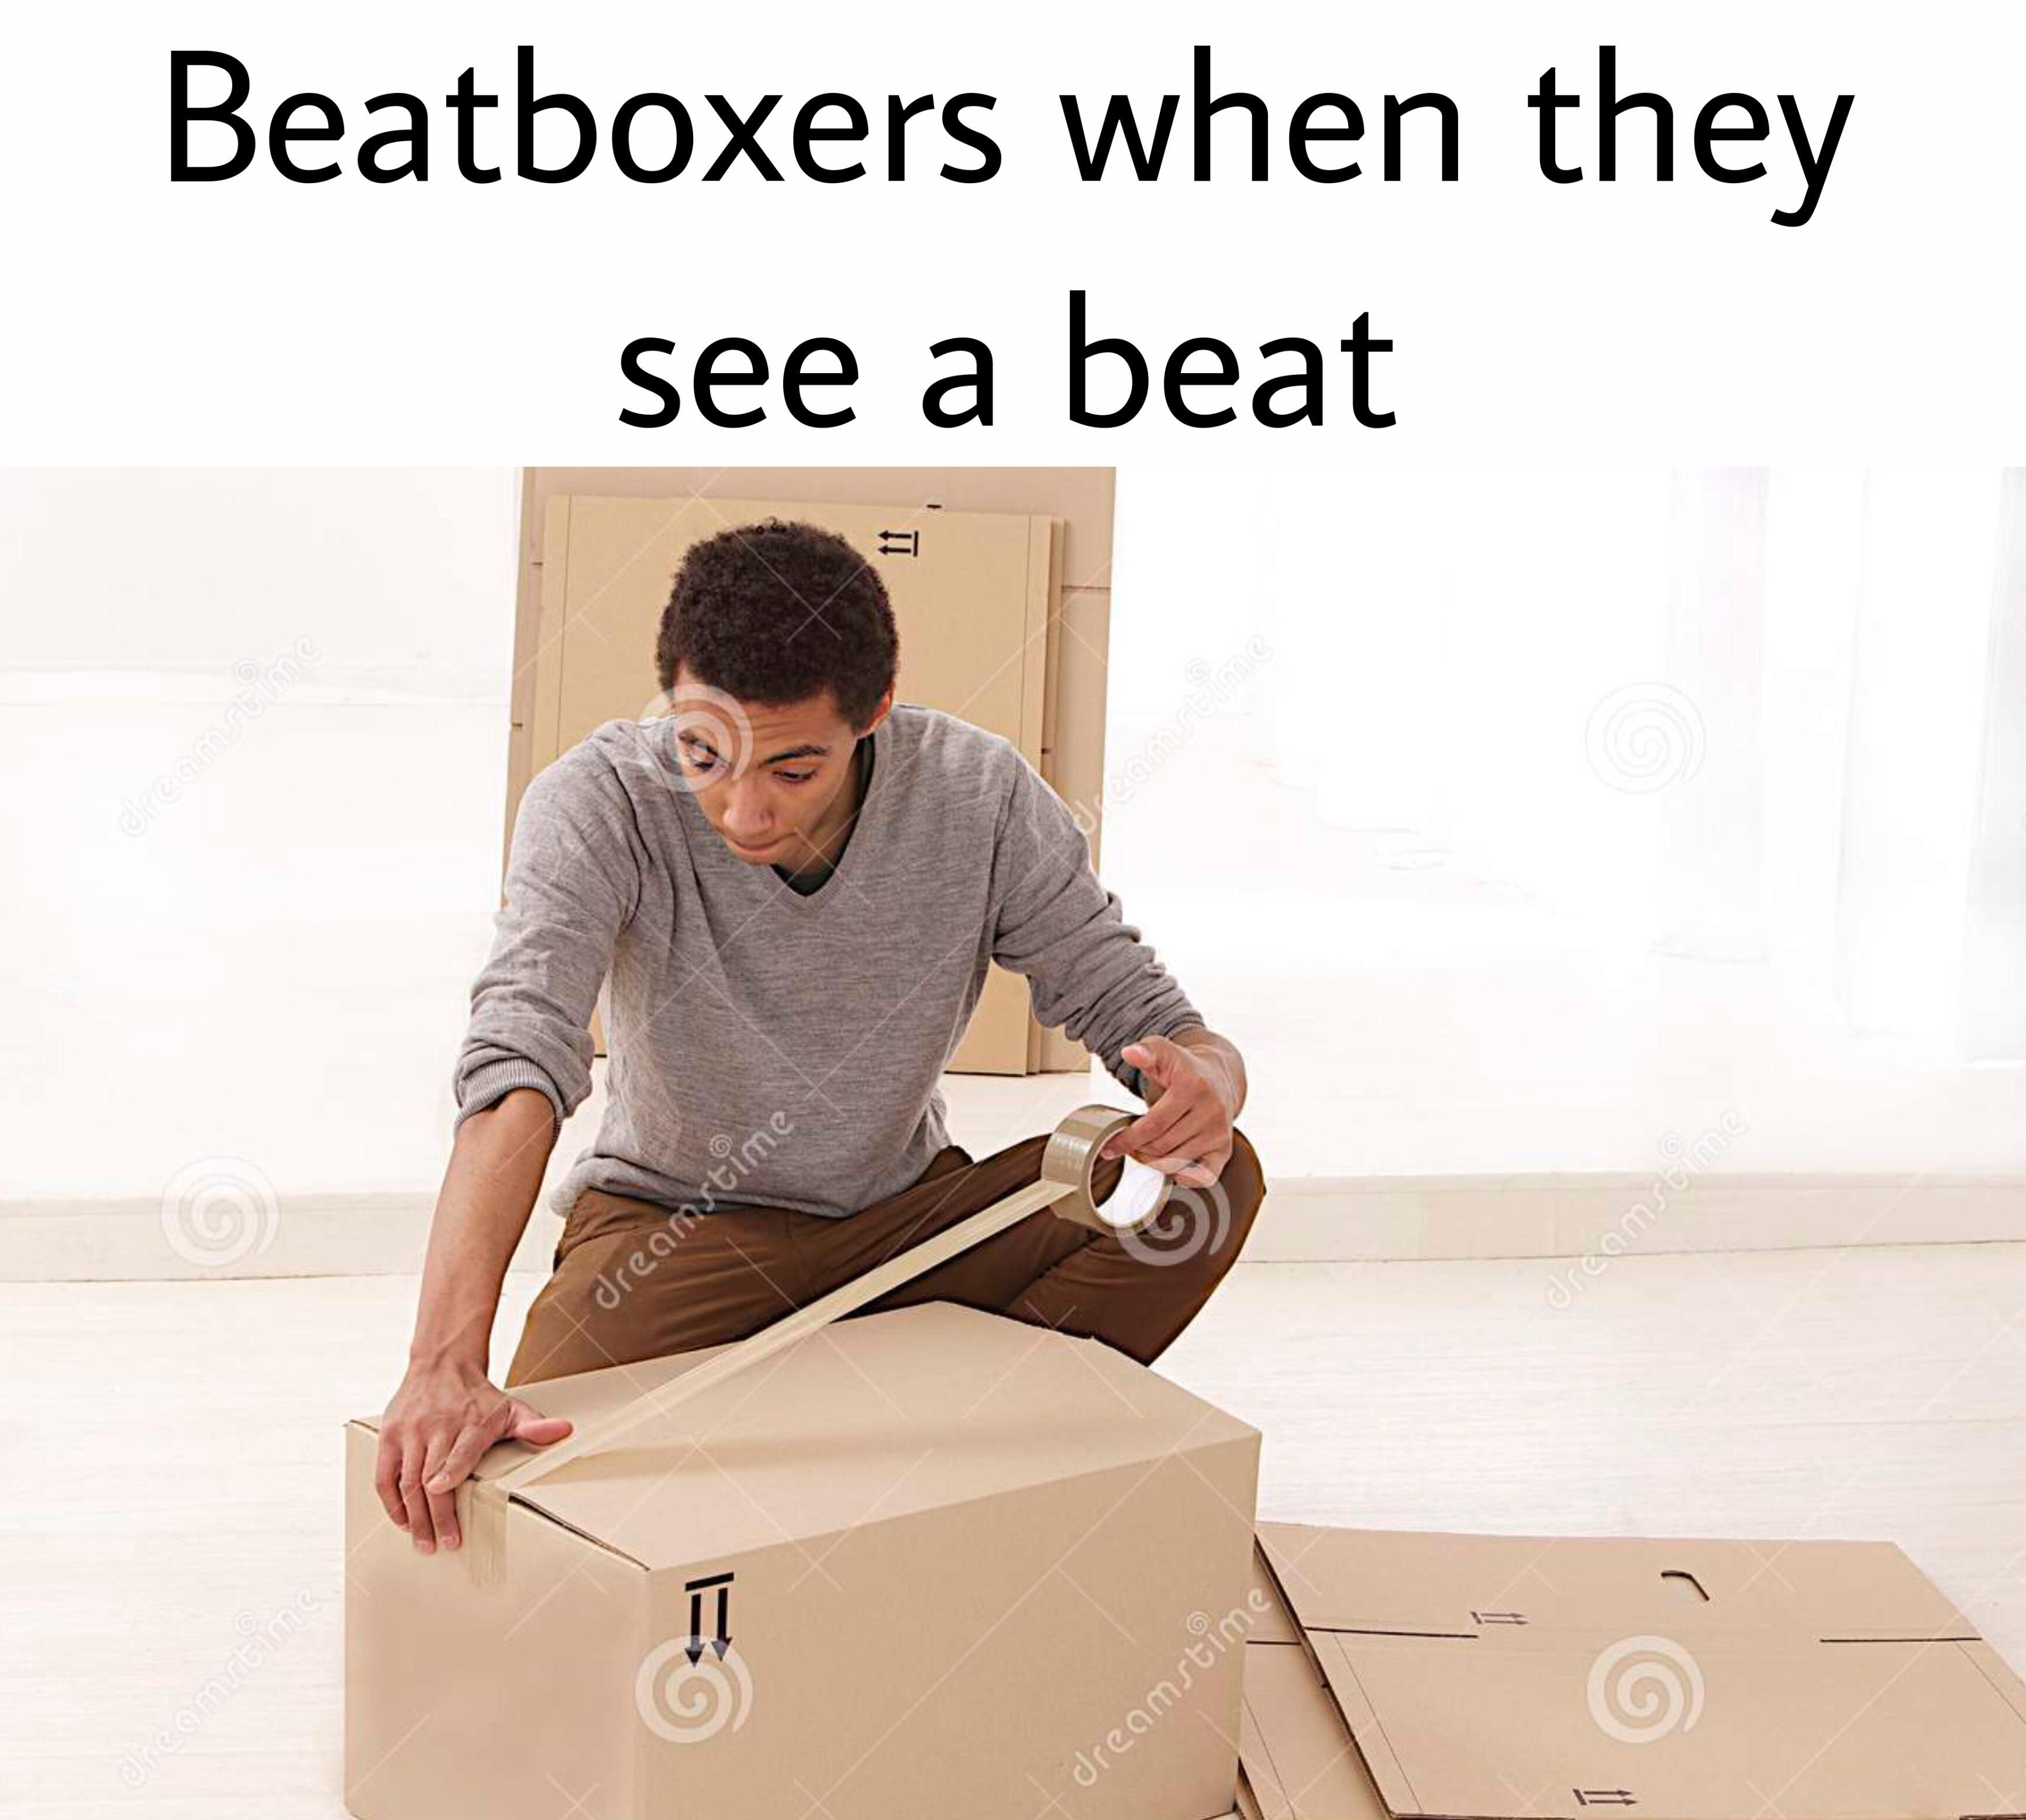 remember to box your beats like the delivery men are actively destroying your package